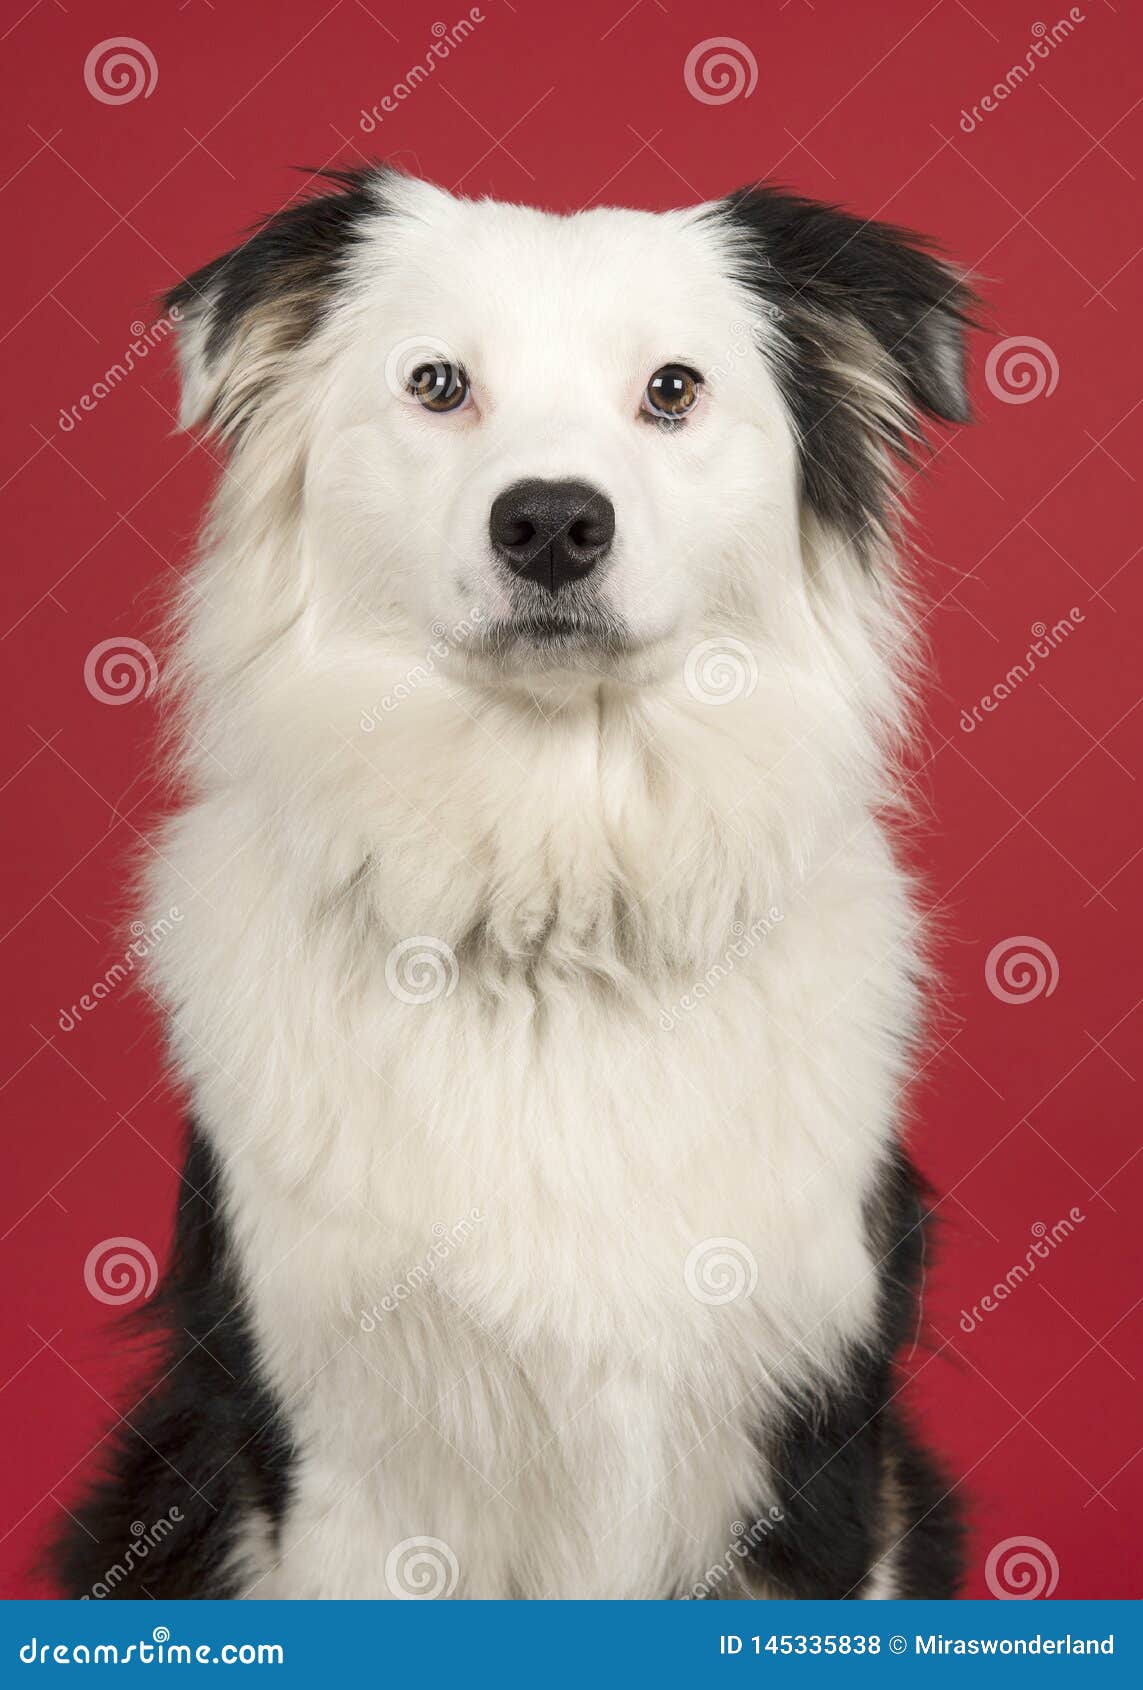 elasticitet Tegne afslappet Portrait of a Black and White Australian Shepherd Looking at the Camera on  a Red Background Stock Photo - Image of canine, animal: 145335838